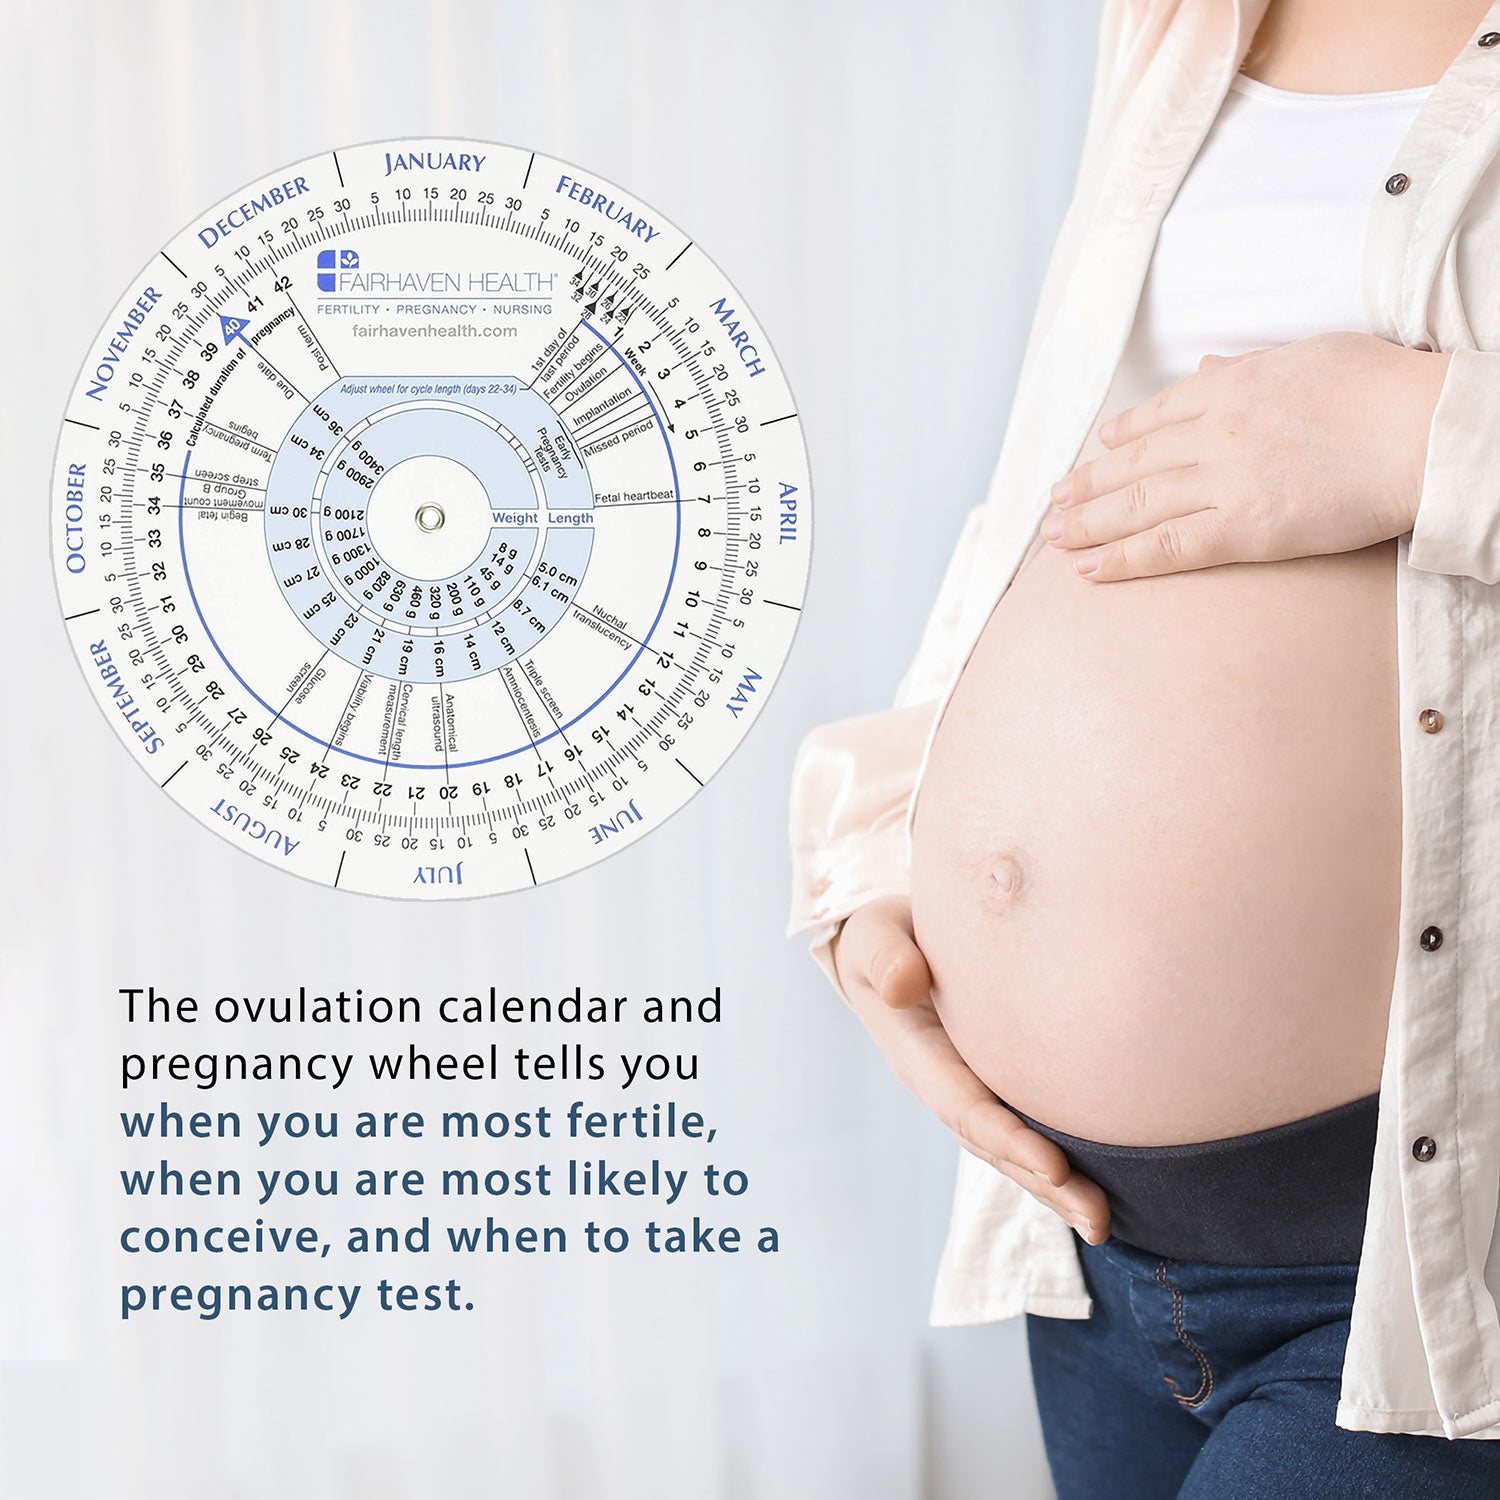 ovulation calendar and pregnancy wheel provides important fertility information